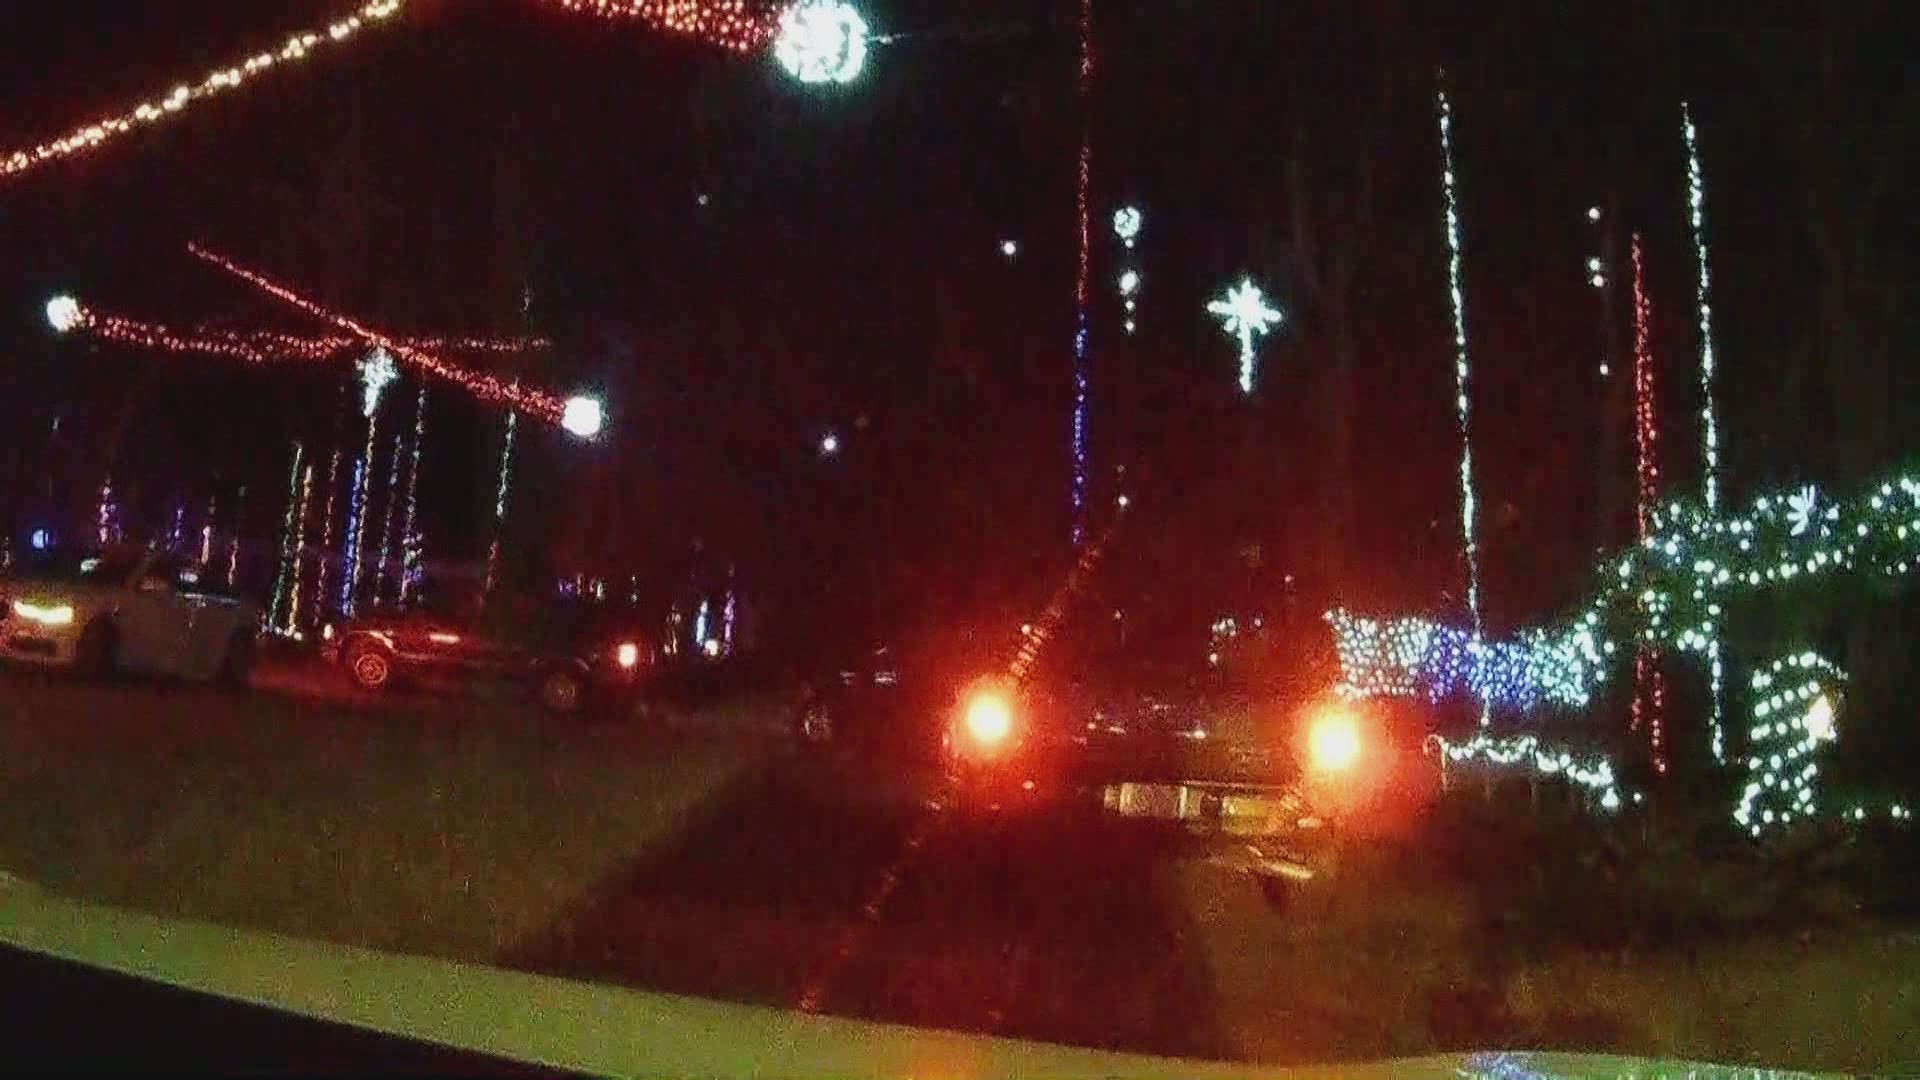 Take a look at the stunning Christmas lights on Girvin Road in Blackhawk Bluff! While the lights are pretty, the traffic pattern enforced by JSO is causing concern.